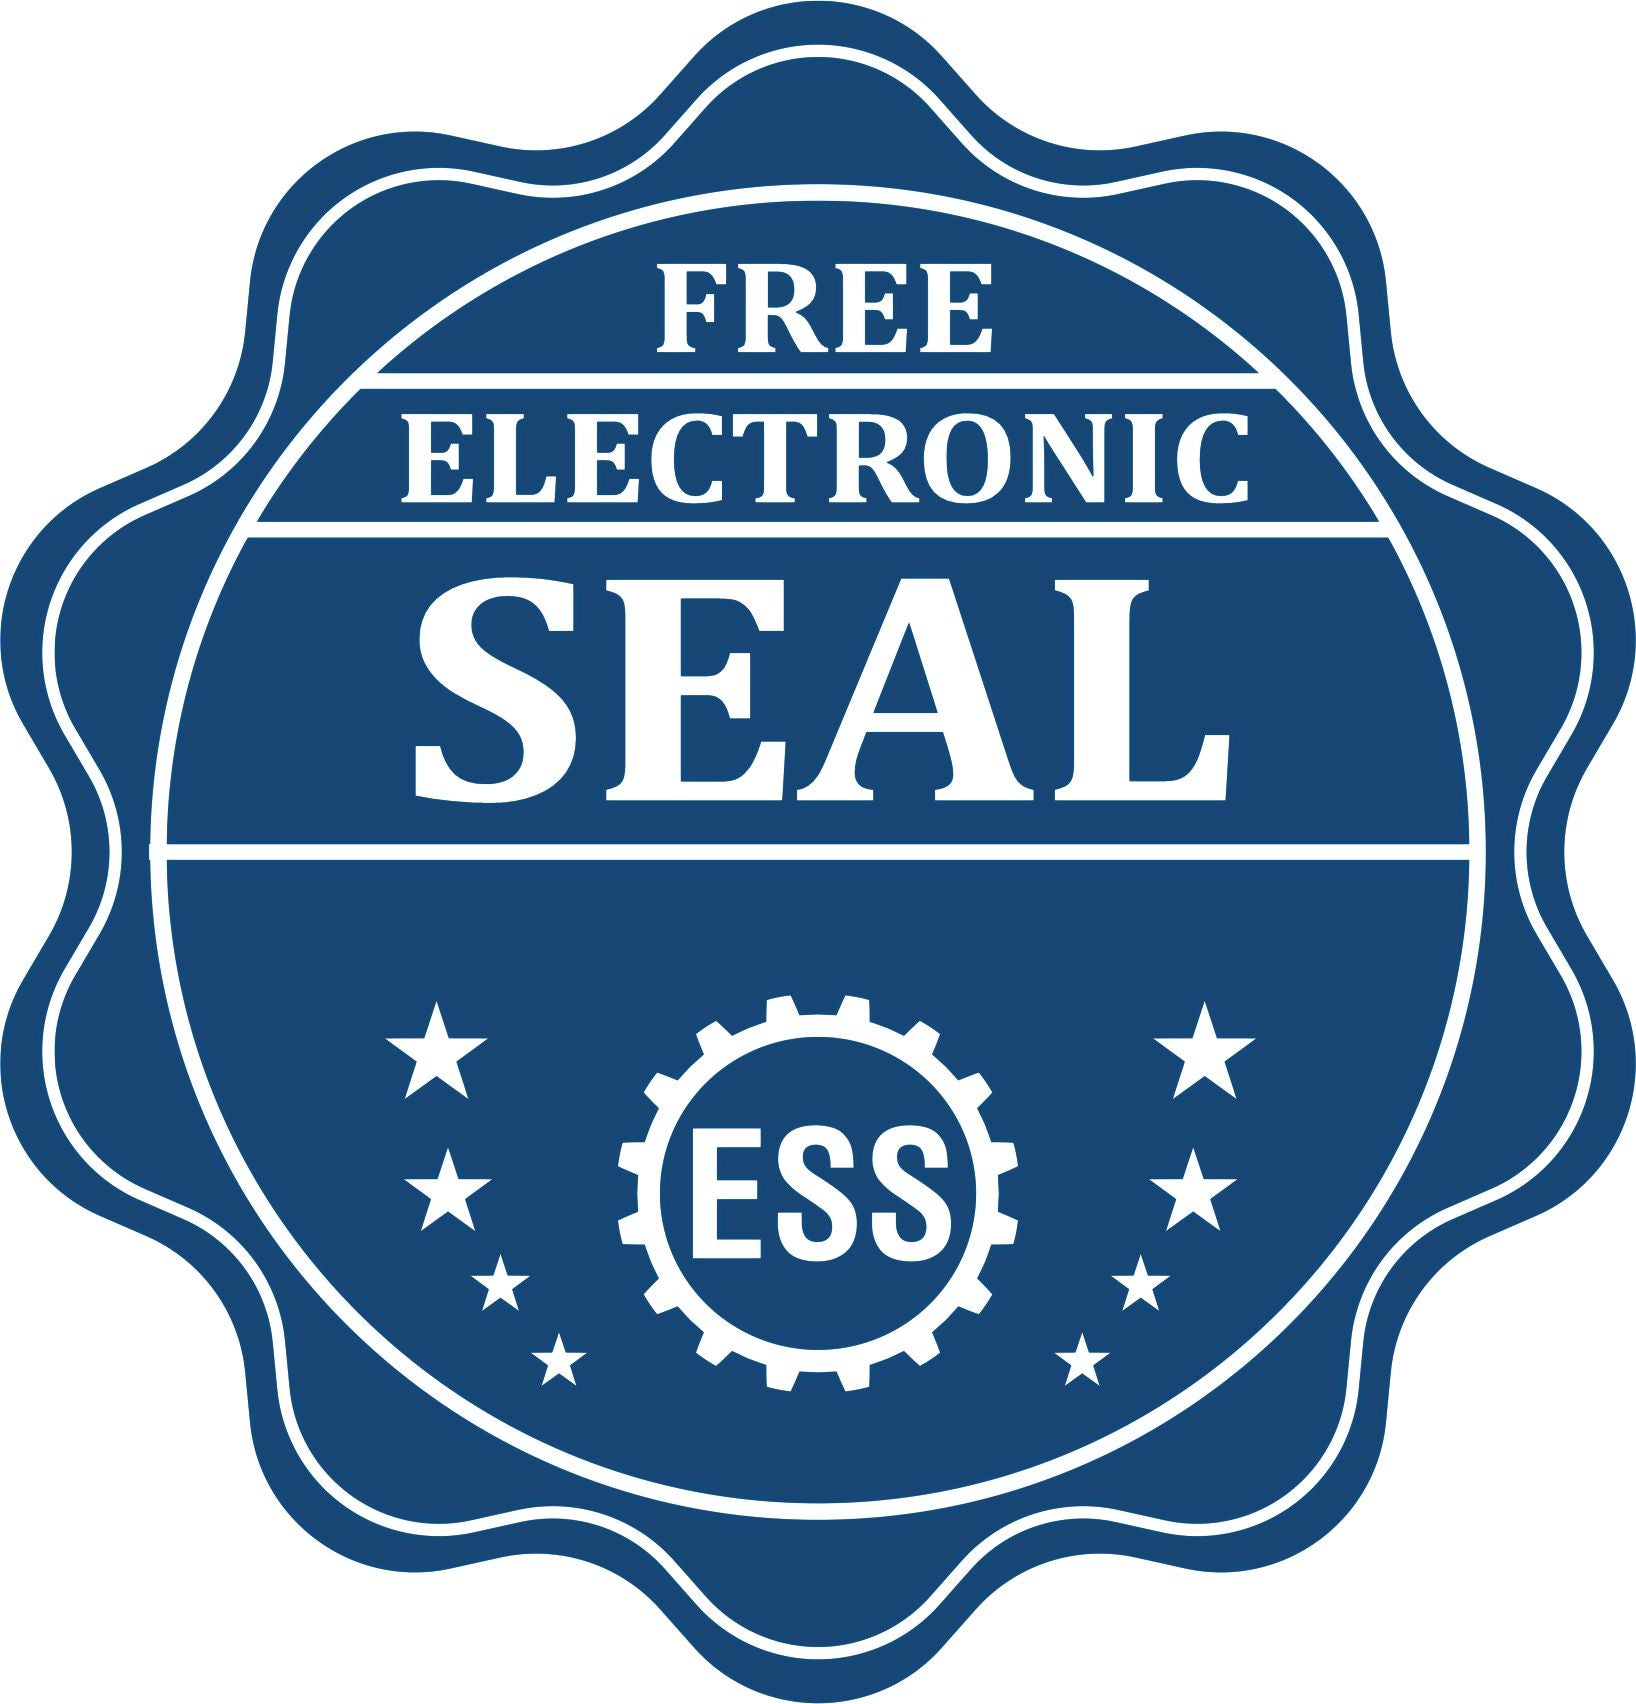 A badge showing a free electronic seal for the Long Reach Hawaii Land Surveyor Seal with stars and the ESS gear on the emblem.